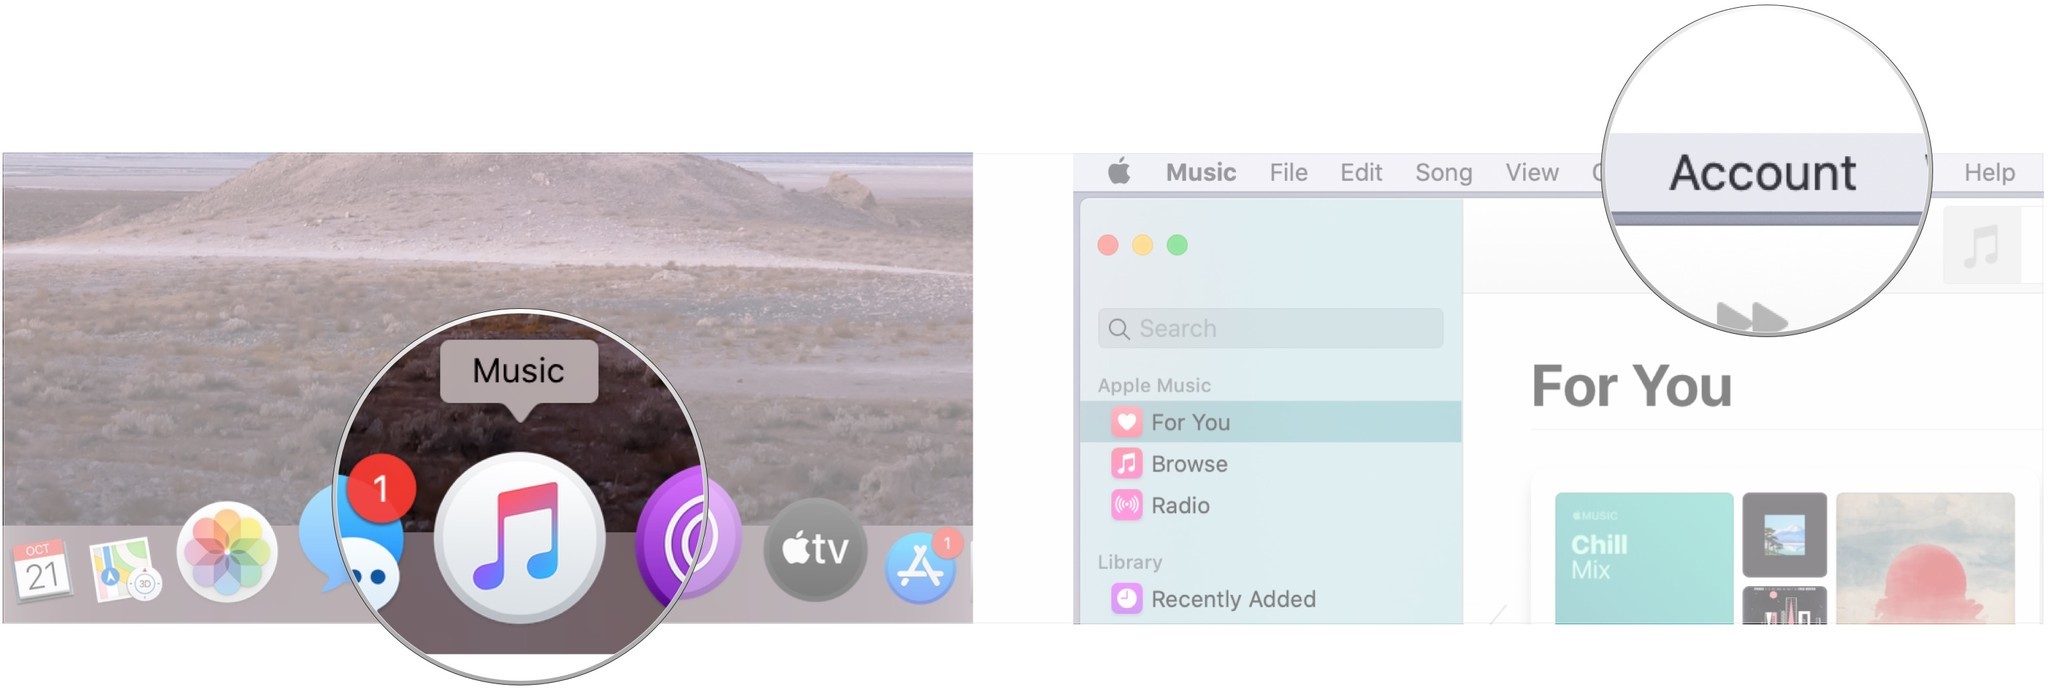 Switch to a Family Plan on Apple Music on Mac by showing: Open Music, click Account